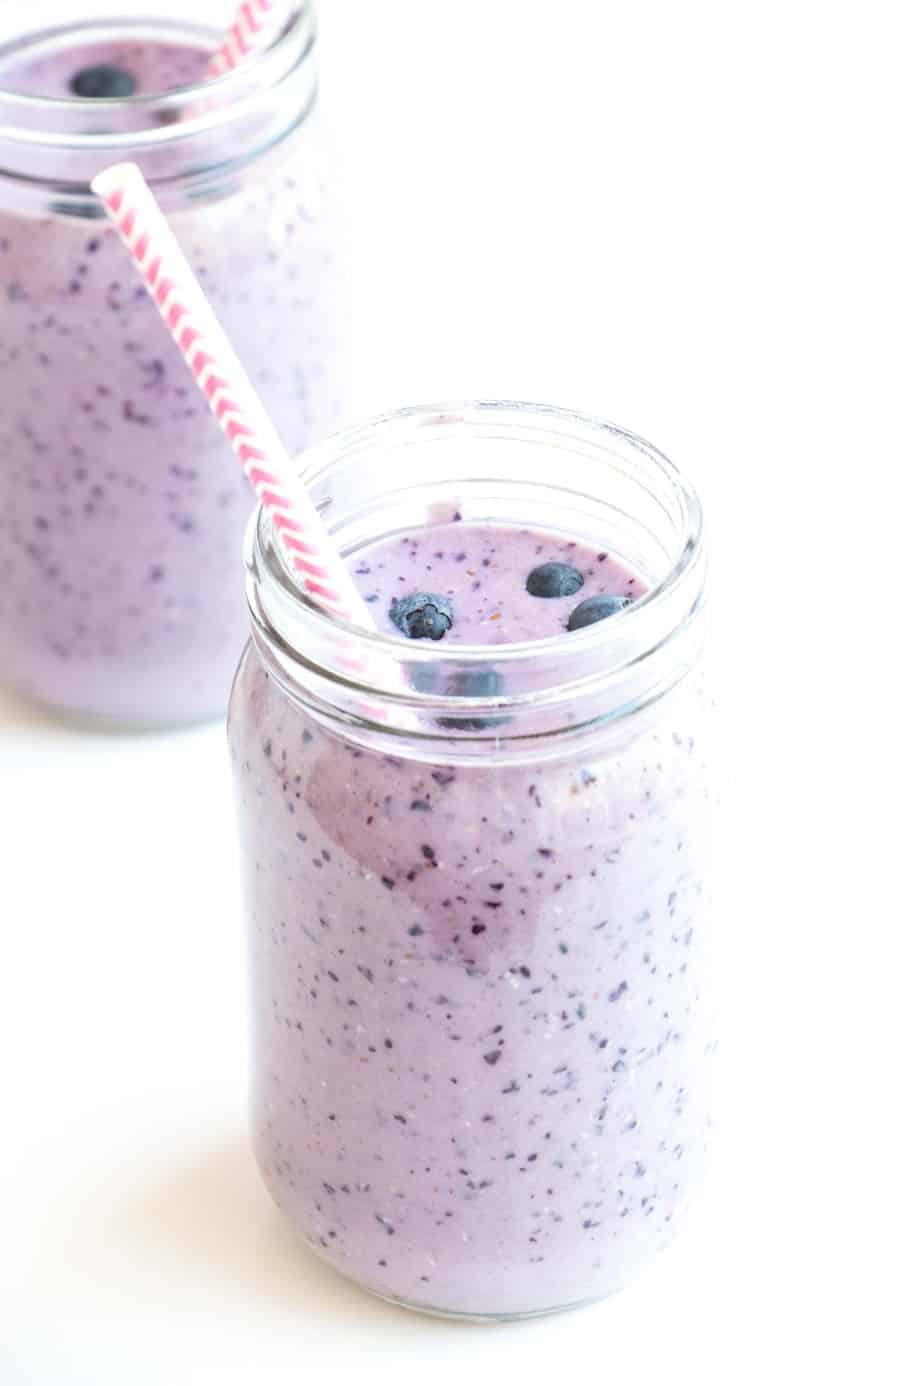 Healthy Blueberry Smoothie with fresh blueberries and a straw.